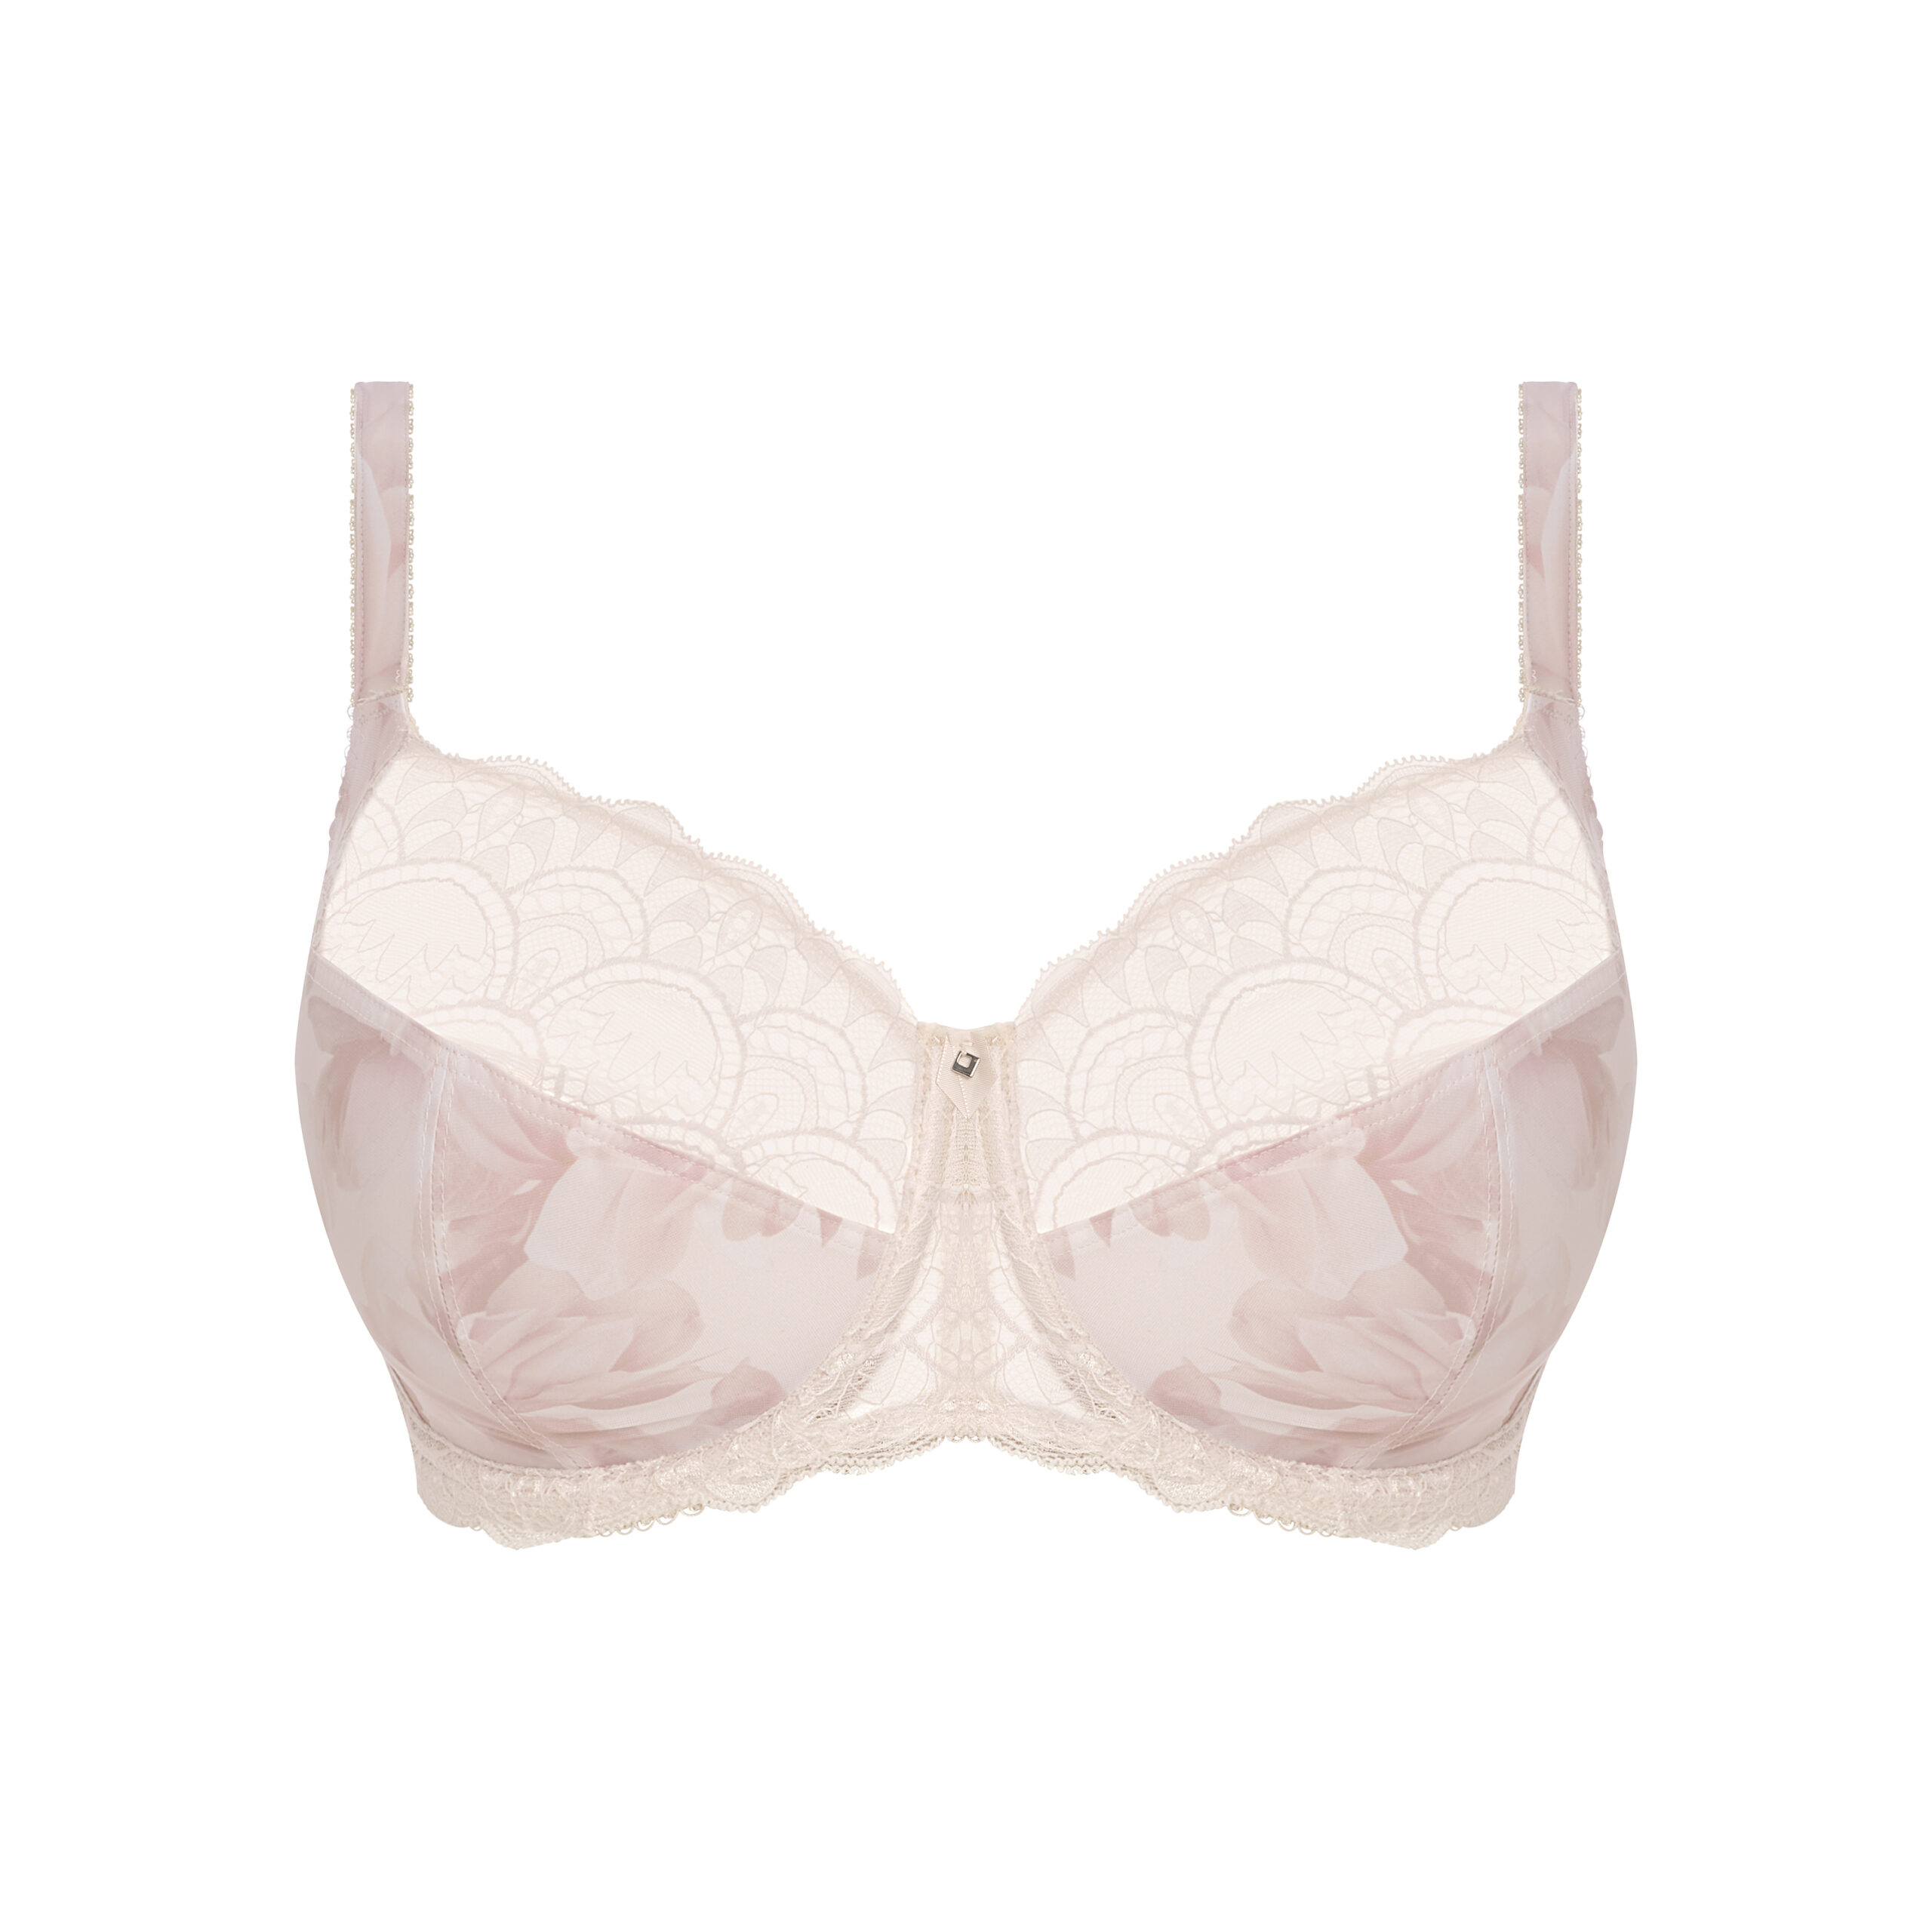 Fantasie Lingerie on X: Be in full bloom this summer with our new  collection, Olivia. With dainty detailing and exquisite support, Olivia  makes everyday lingerie feel beautiful. View the collection:   #FantasieLingerie #